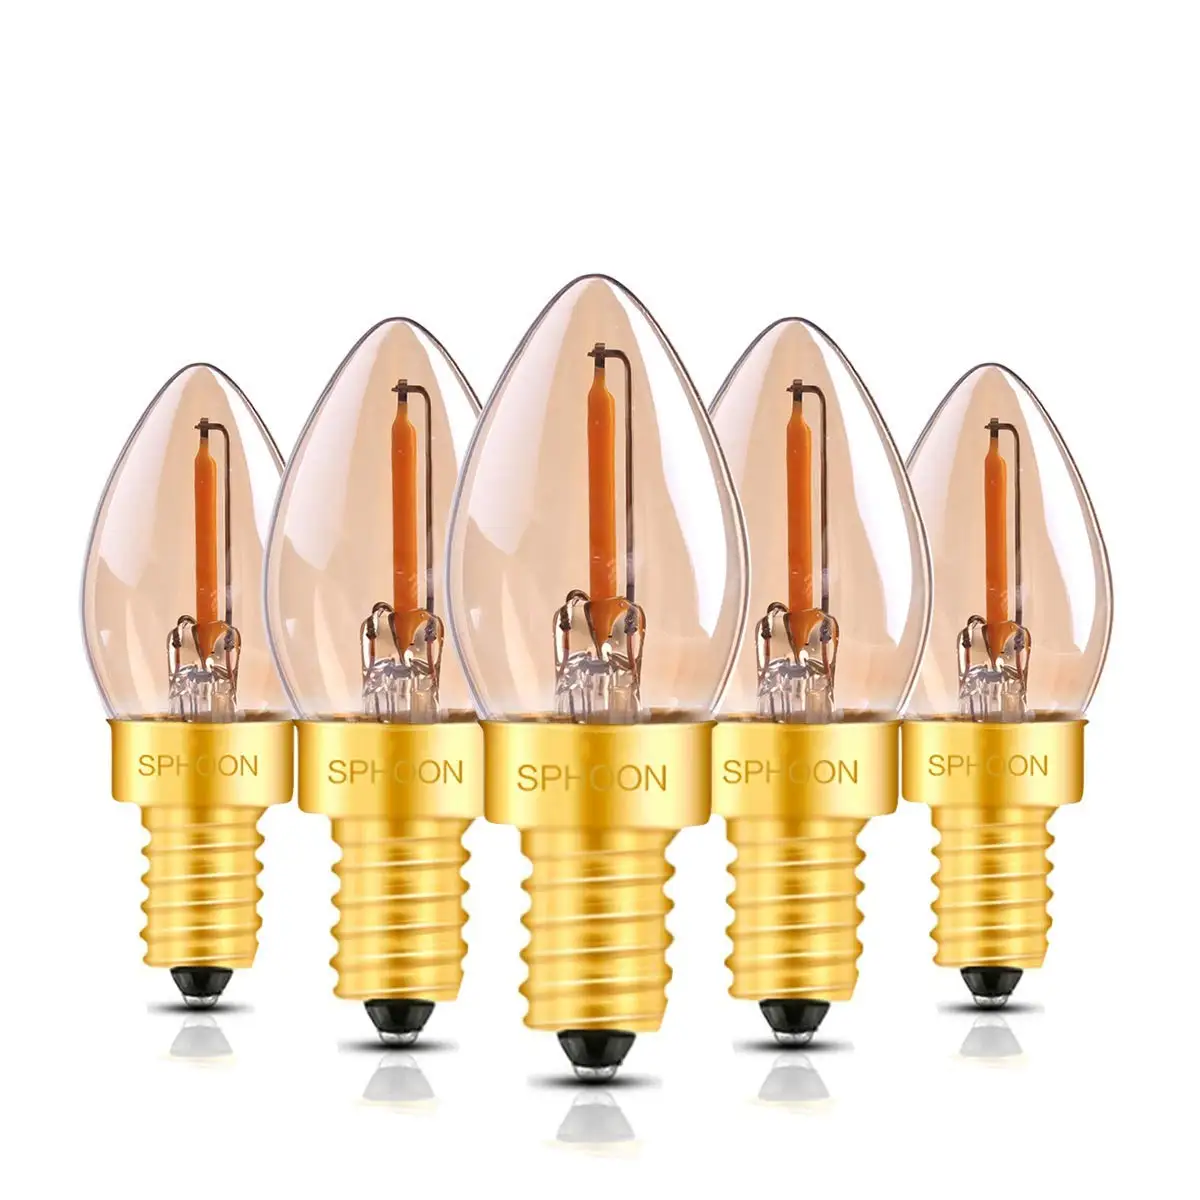 230 Lumens by Lighting Science 6-Pack Warm White 2200K Candelabra LED Filament Bulbs 2.5W 25 Watt Equivalent Amber Dimmable Chandelier Decorative Candle Bulb E26 Base